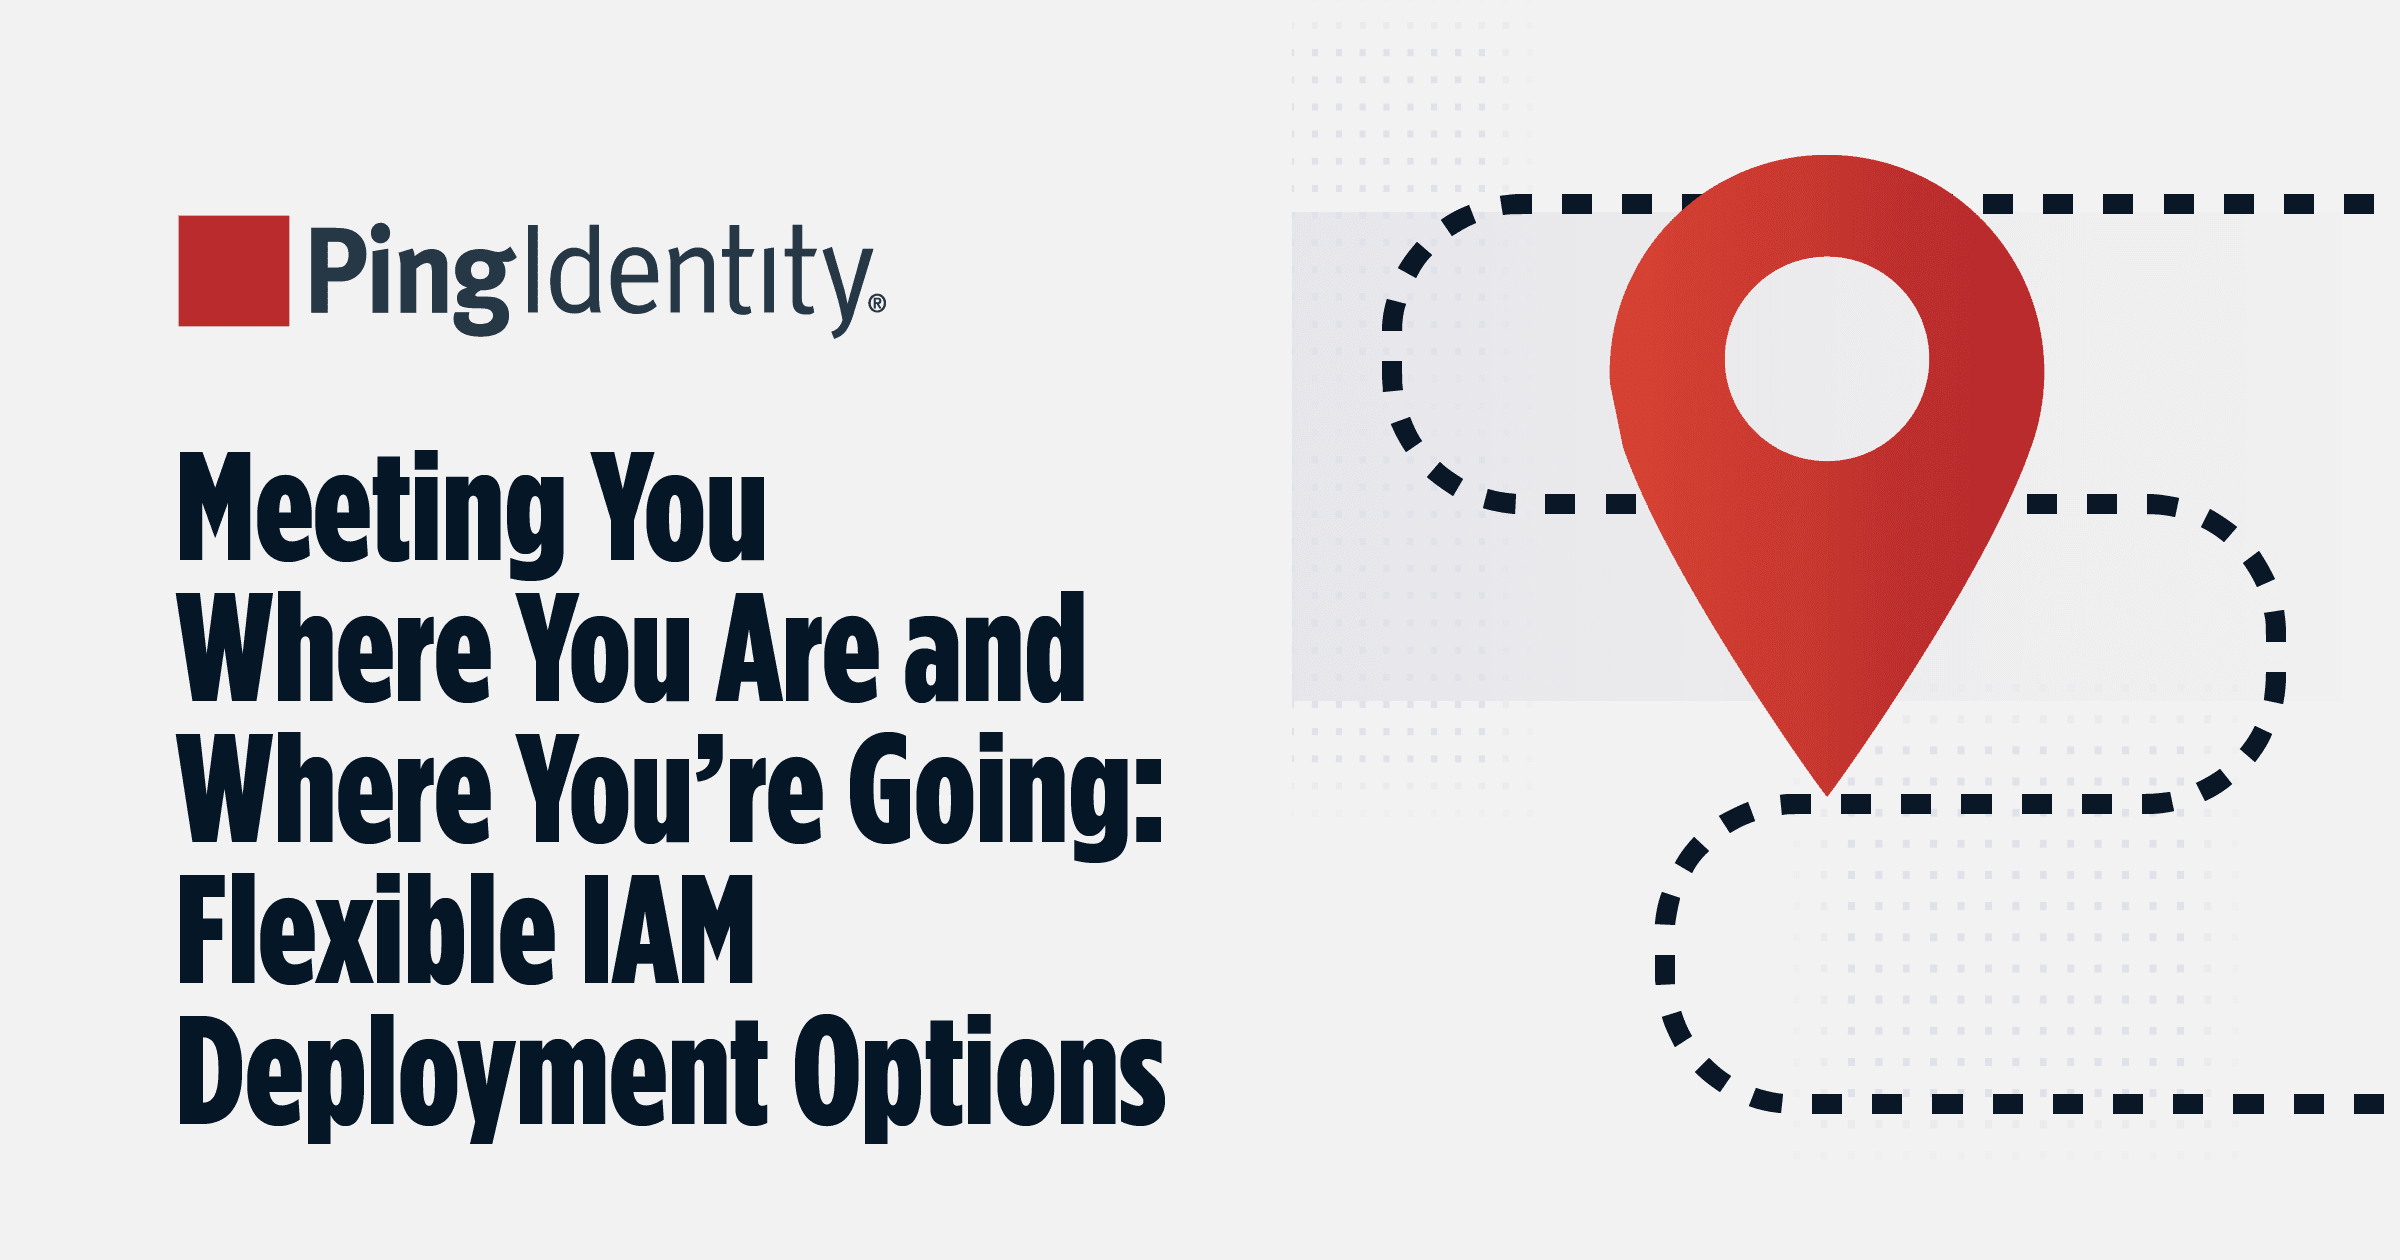 Meeting You Where You Are and Where You’re Going: Flexible IAM Deployment Options